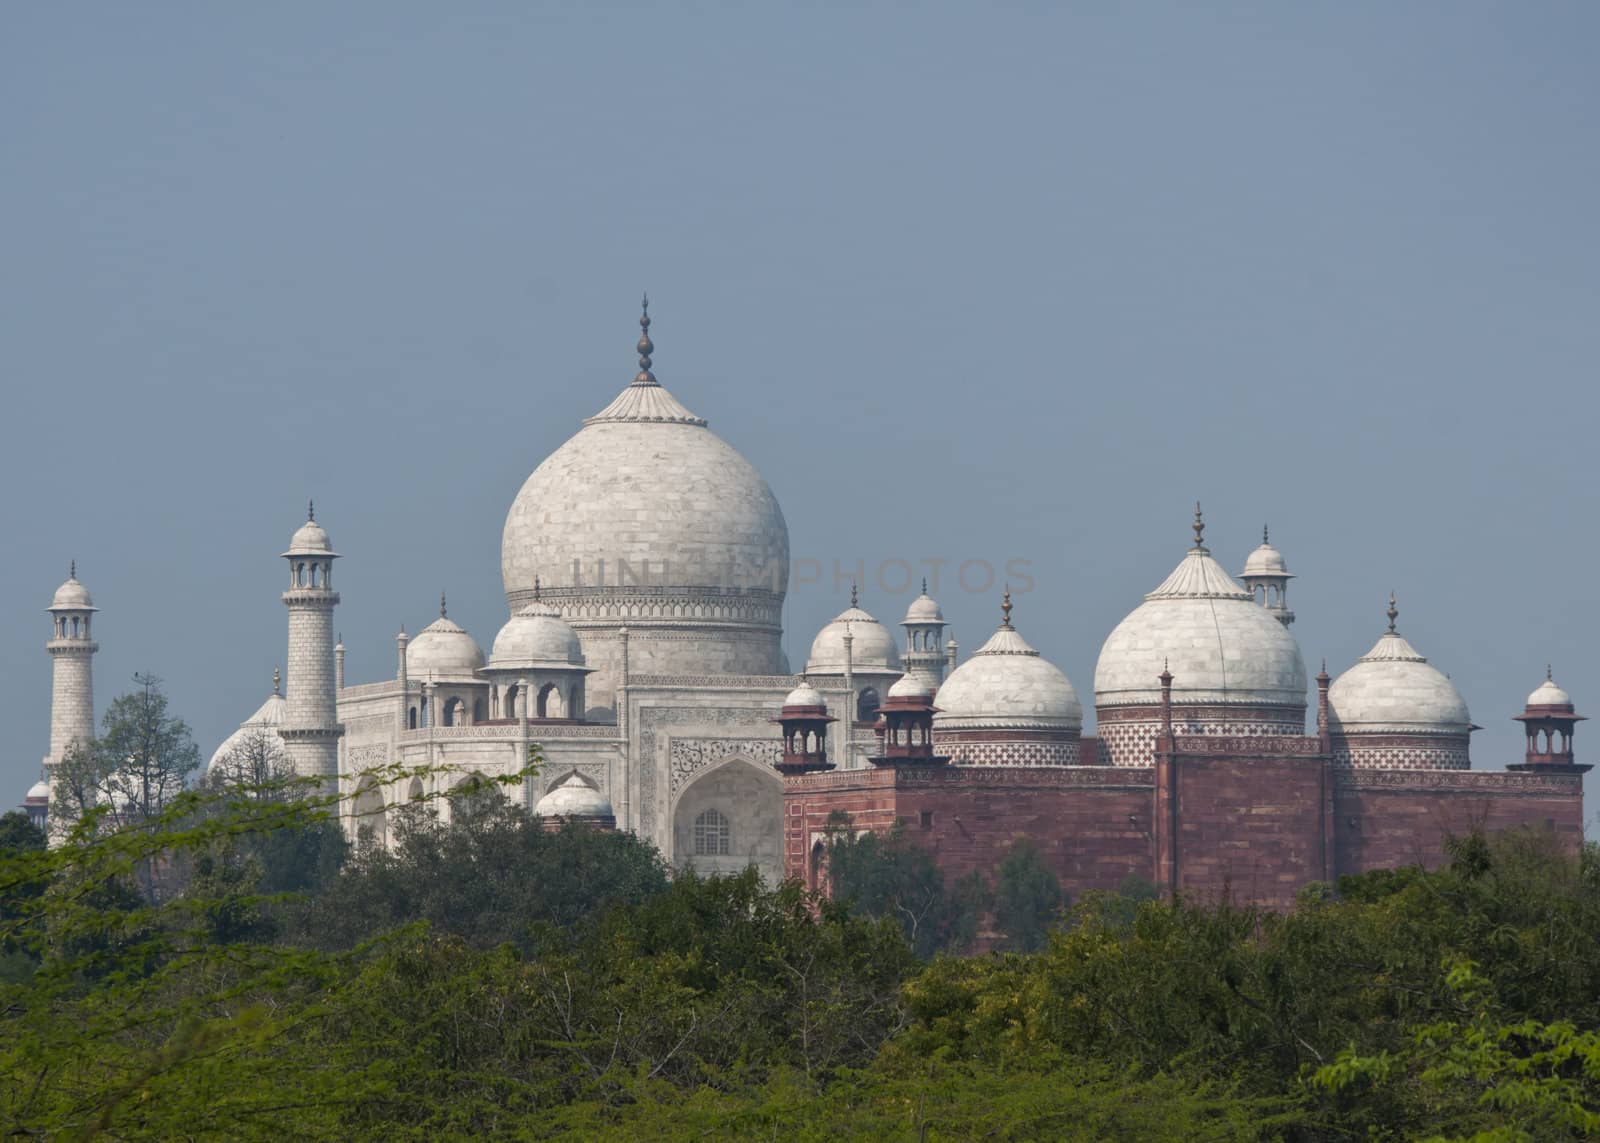 Guesthouse and Taj Mahal mausoleum seen over forest in India's A by Claudine